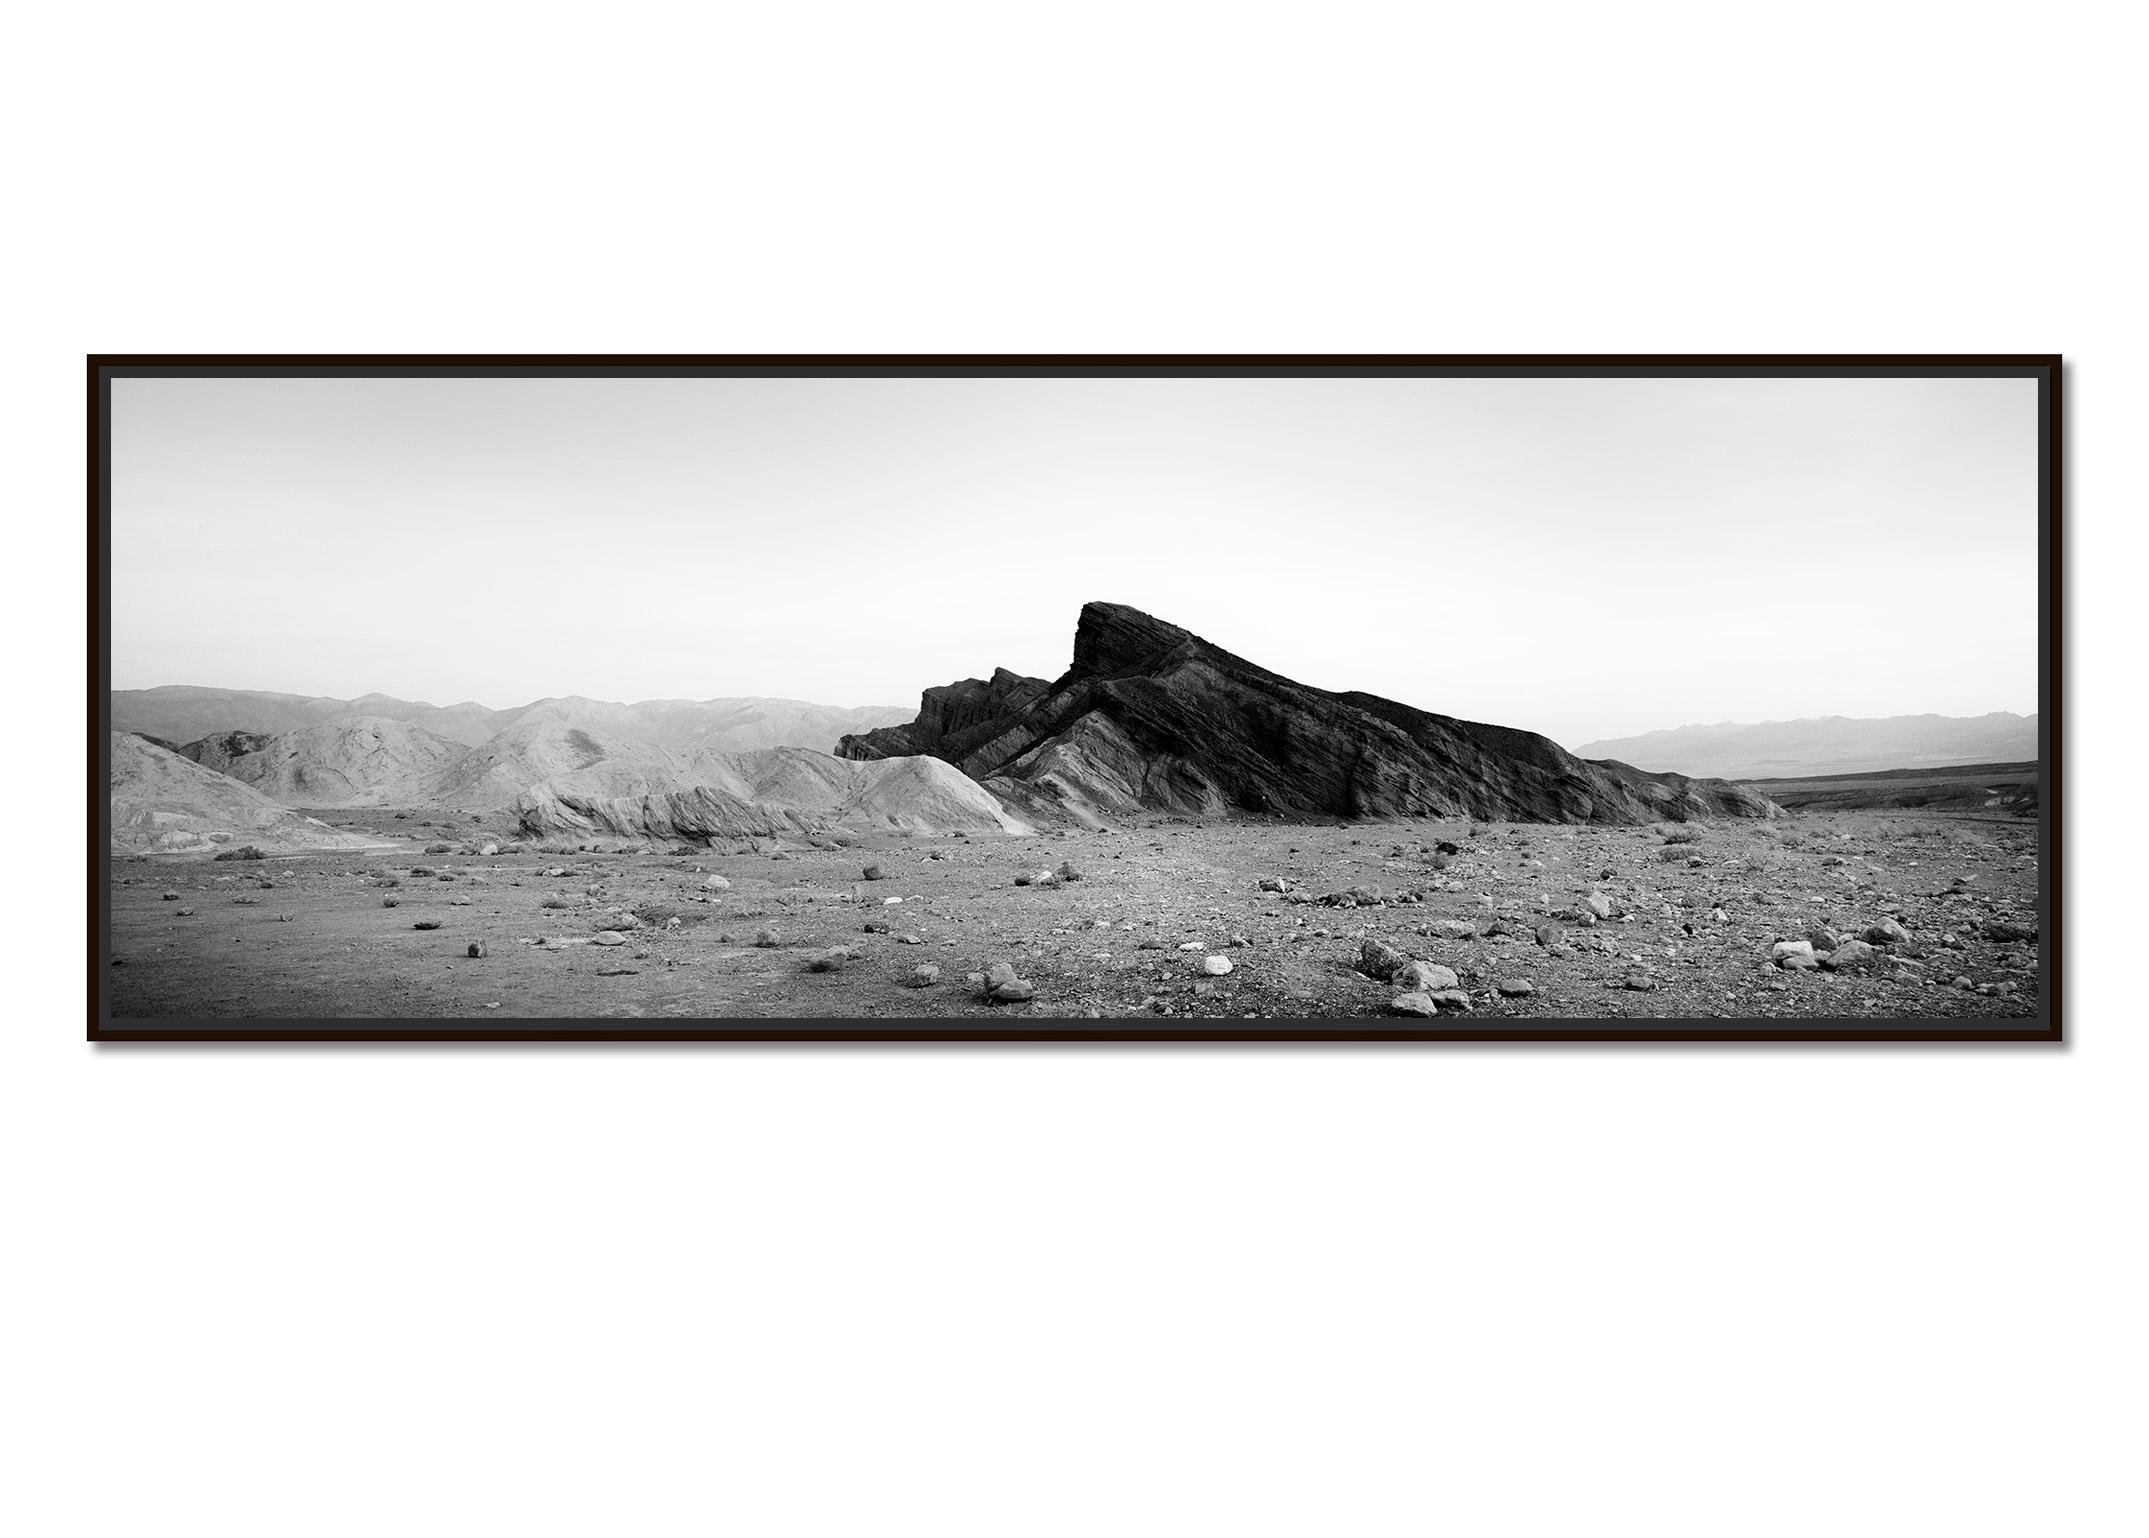 Black Rock, mountains, Death Valley, USA, black and white landscape photography - Photograph by Gerald Berghammer